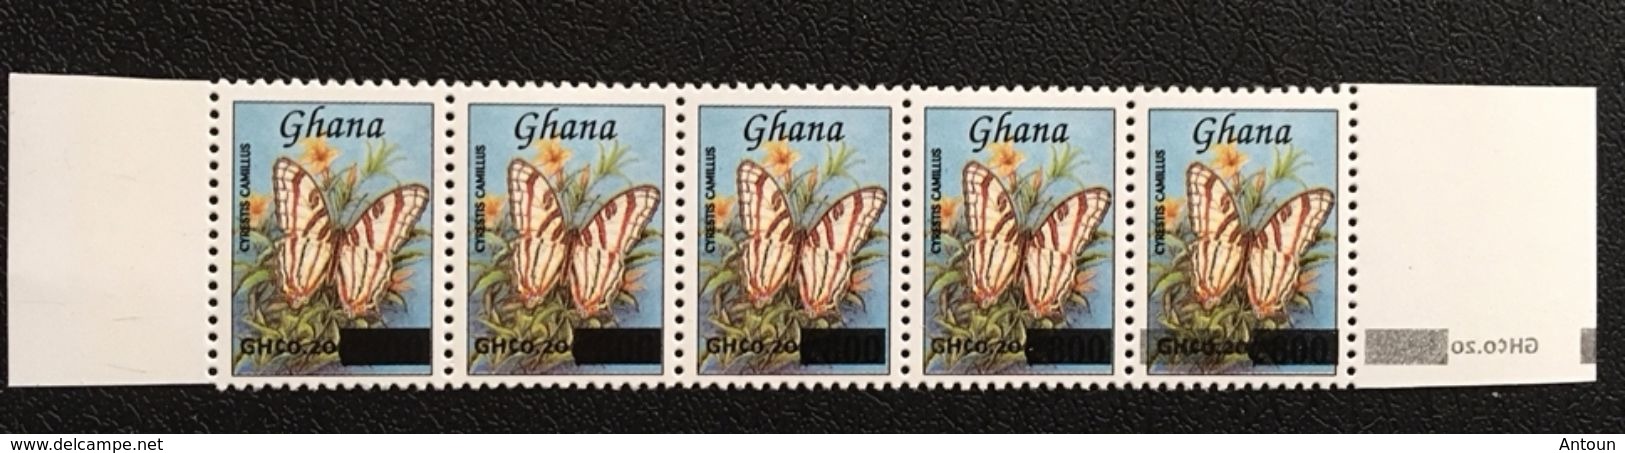 Ghana 2008 Def. Strip Of 5 Surch. Double On 5th Stamp And Margin - Ghana (1957-...)